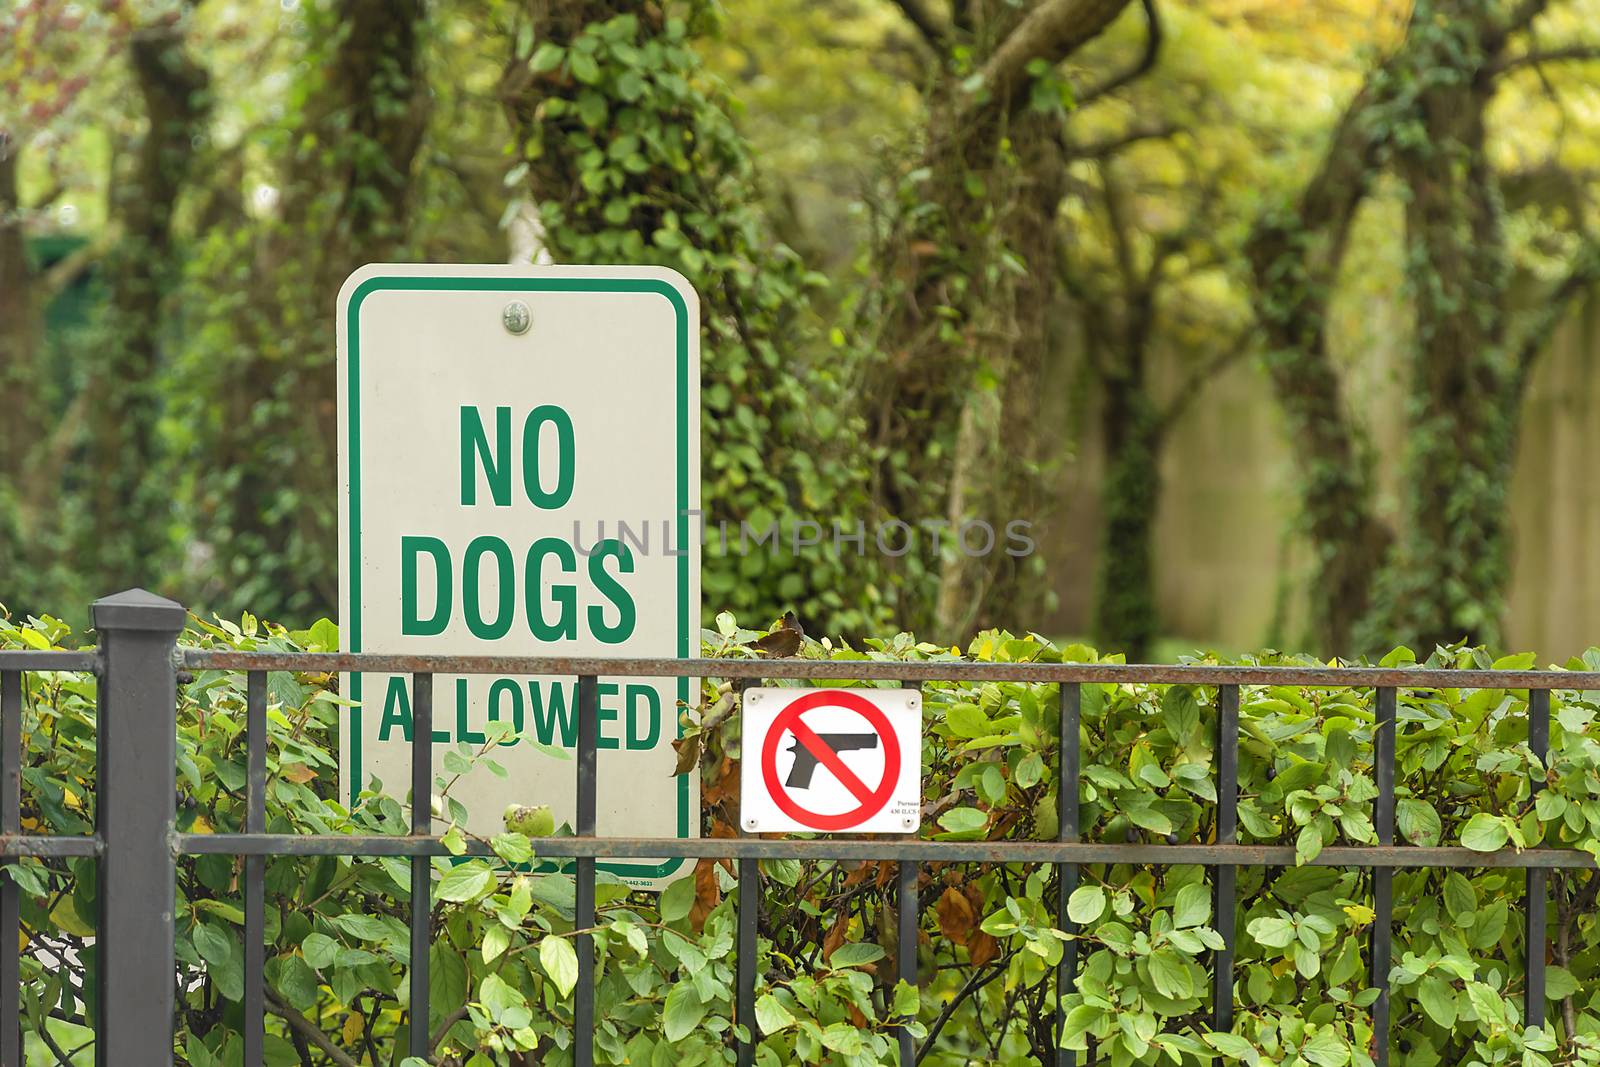 No Dogs and no guns Allowed On The Grass Area Sign